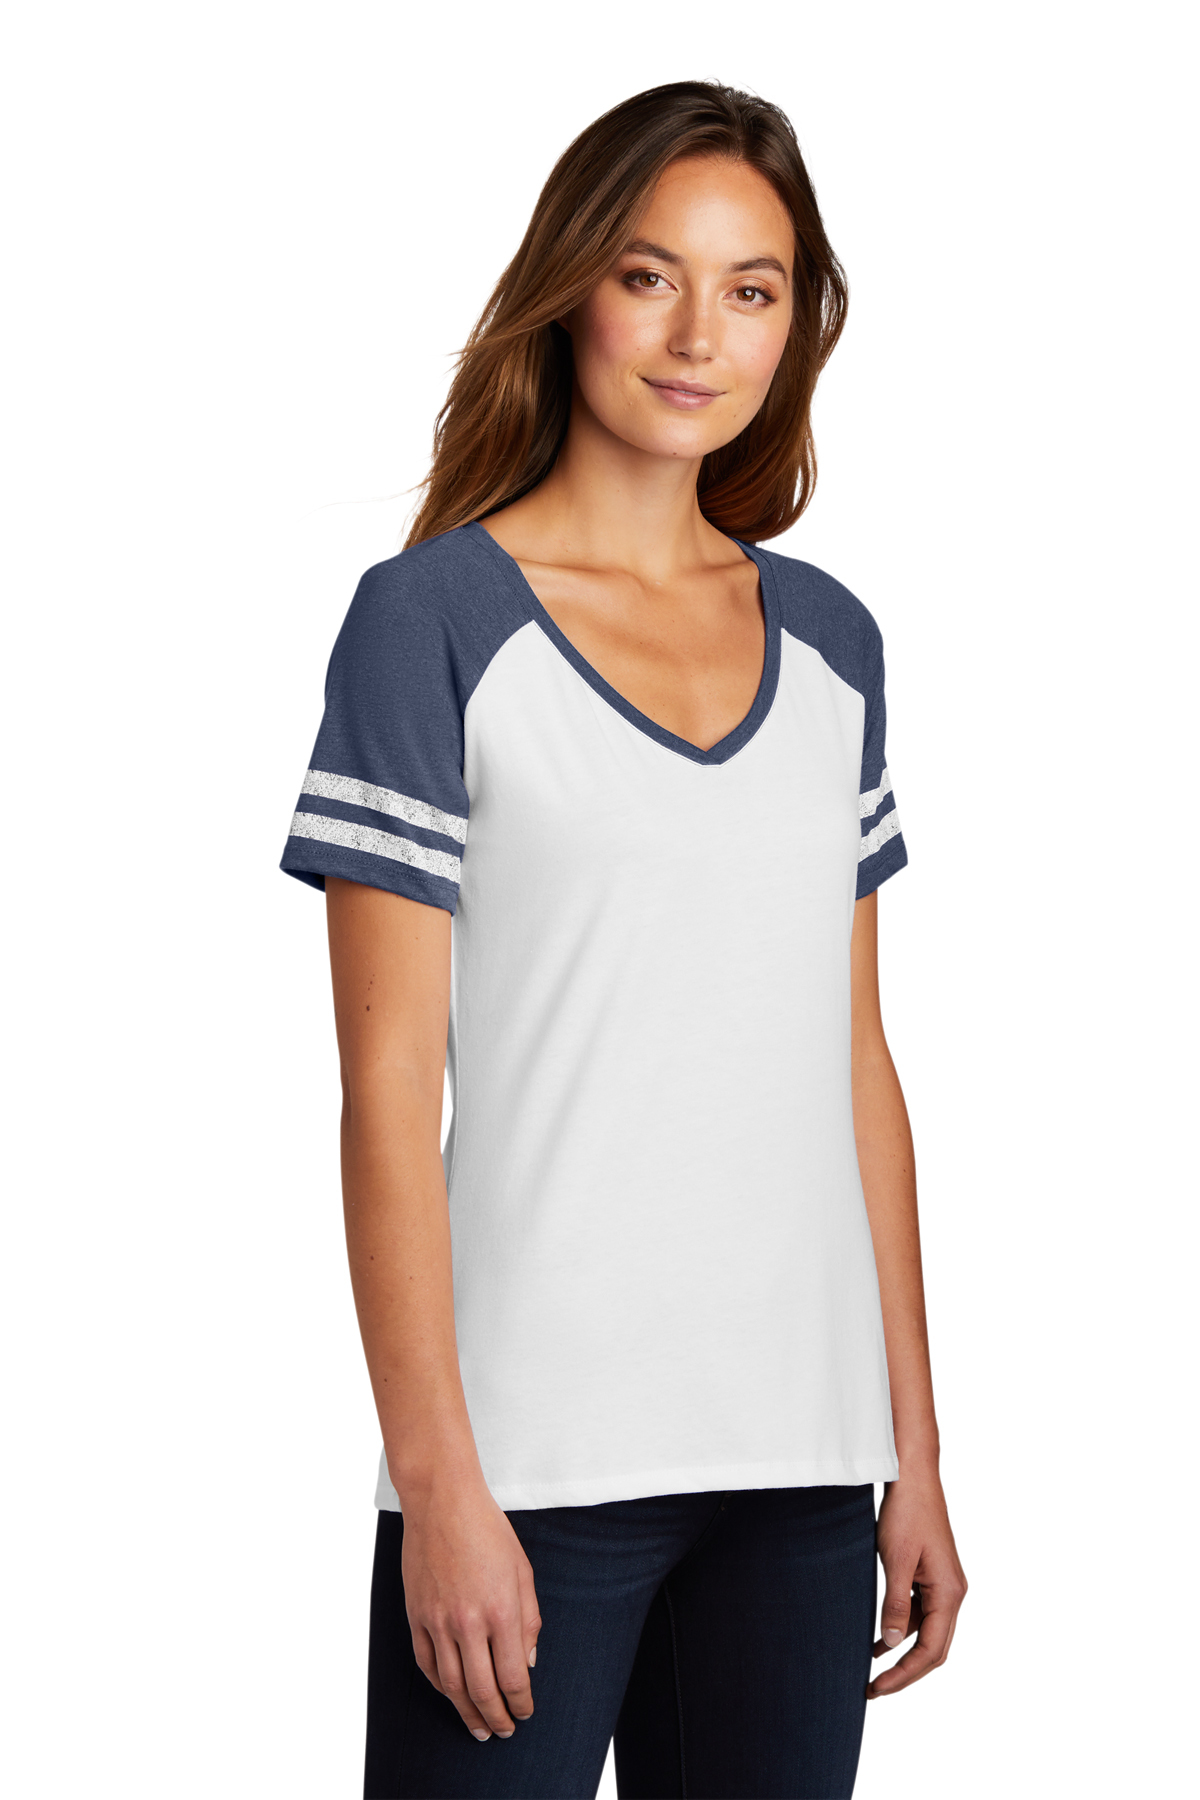 District Women’s Game V-Neck Tee | Product | District